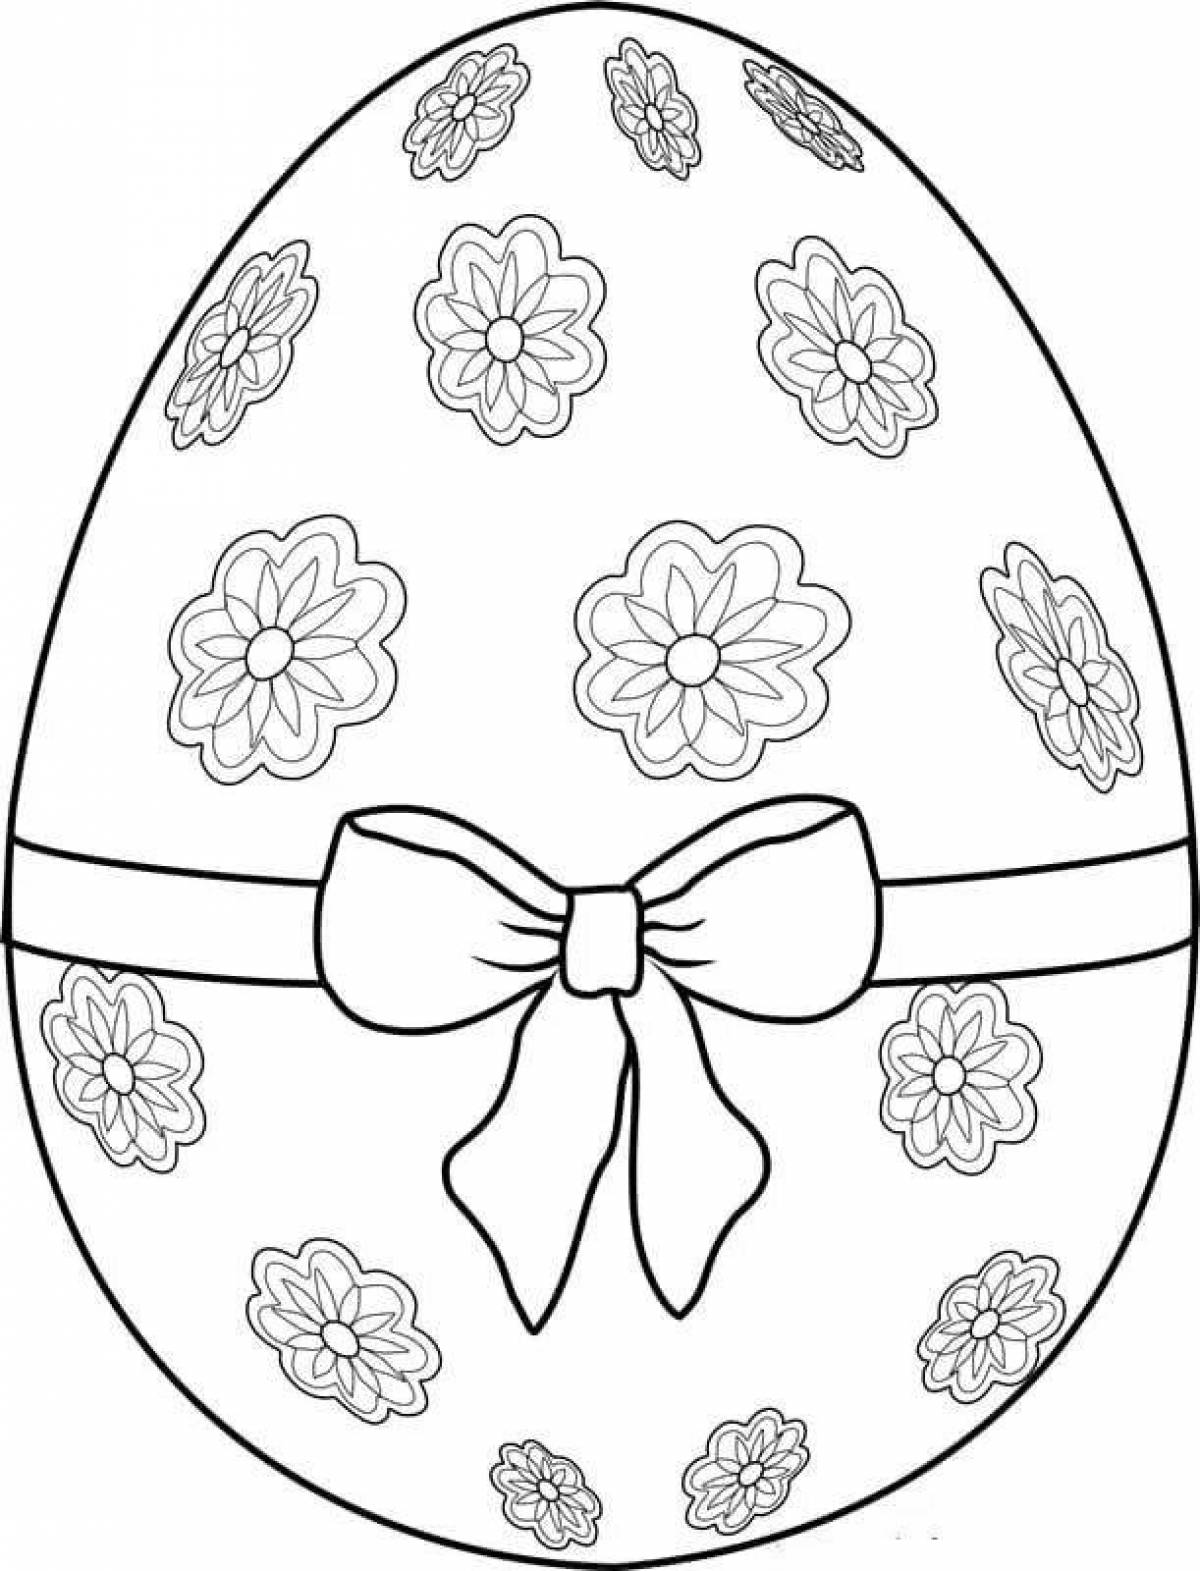 Exquisite Easter egg coloring